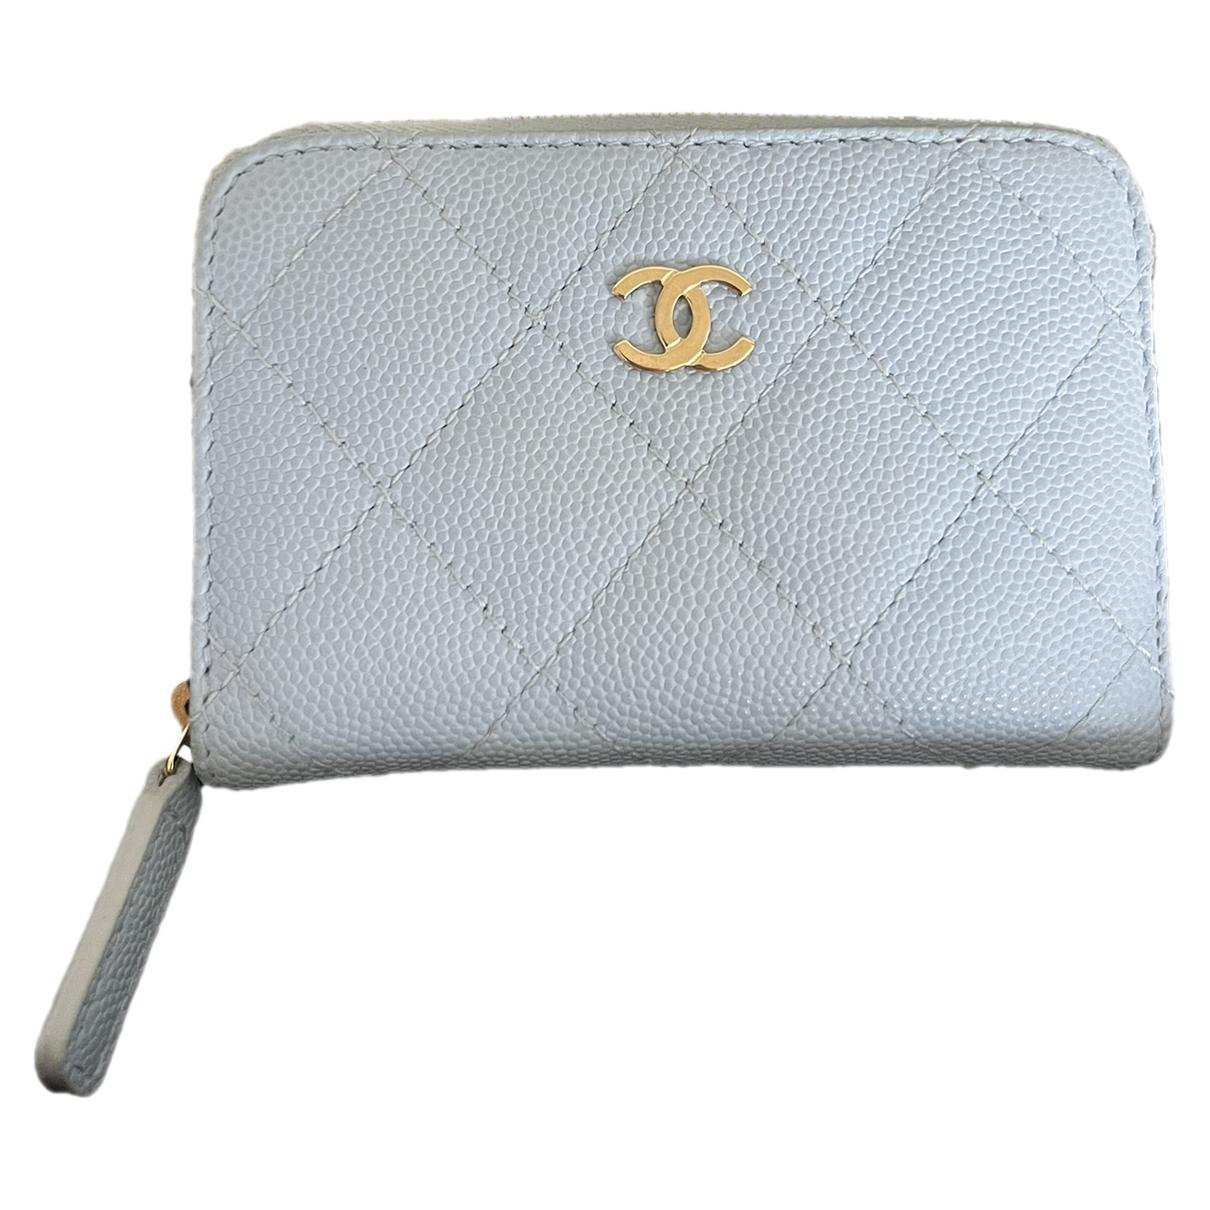 Timeless/classique leather purse Chanel Turquoise in Leather - 33095783